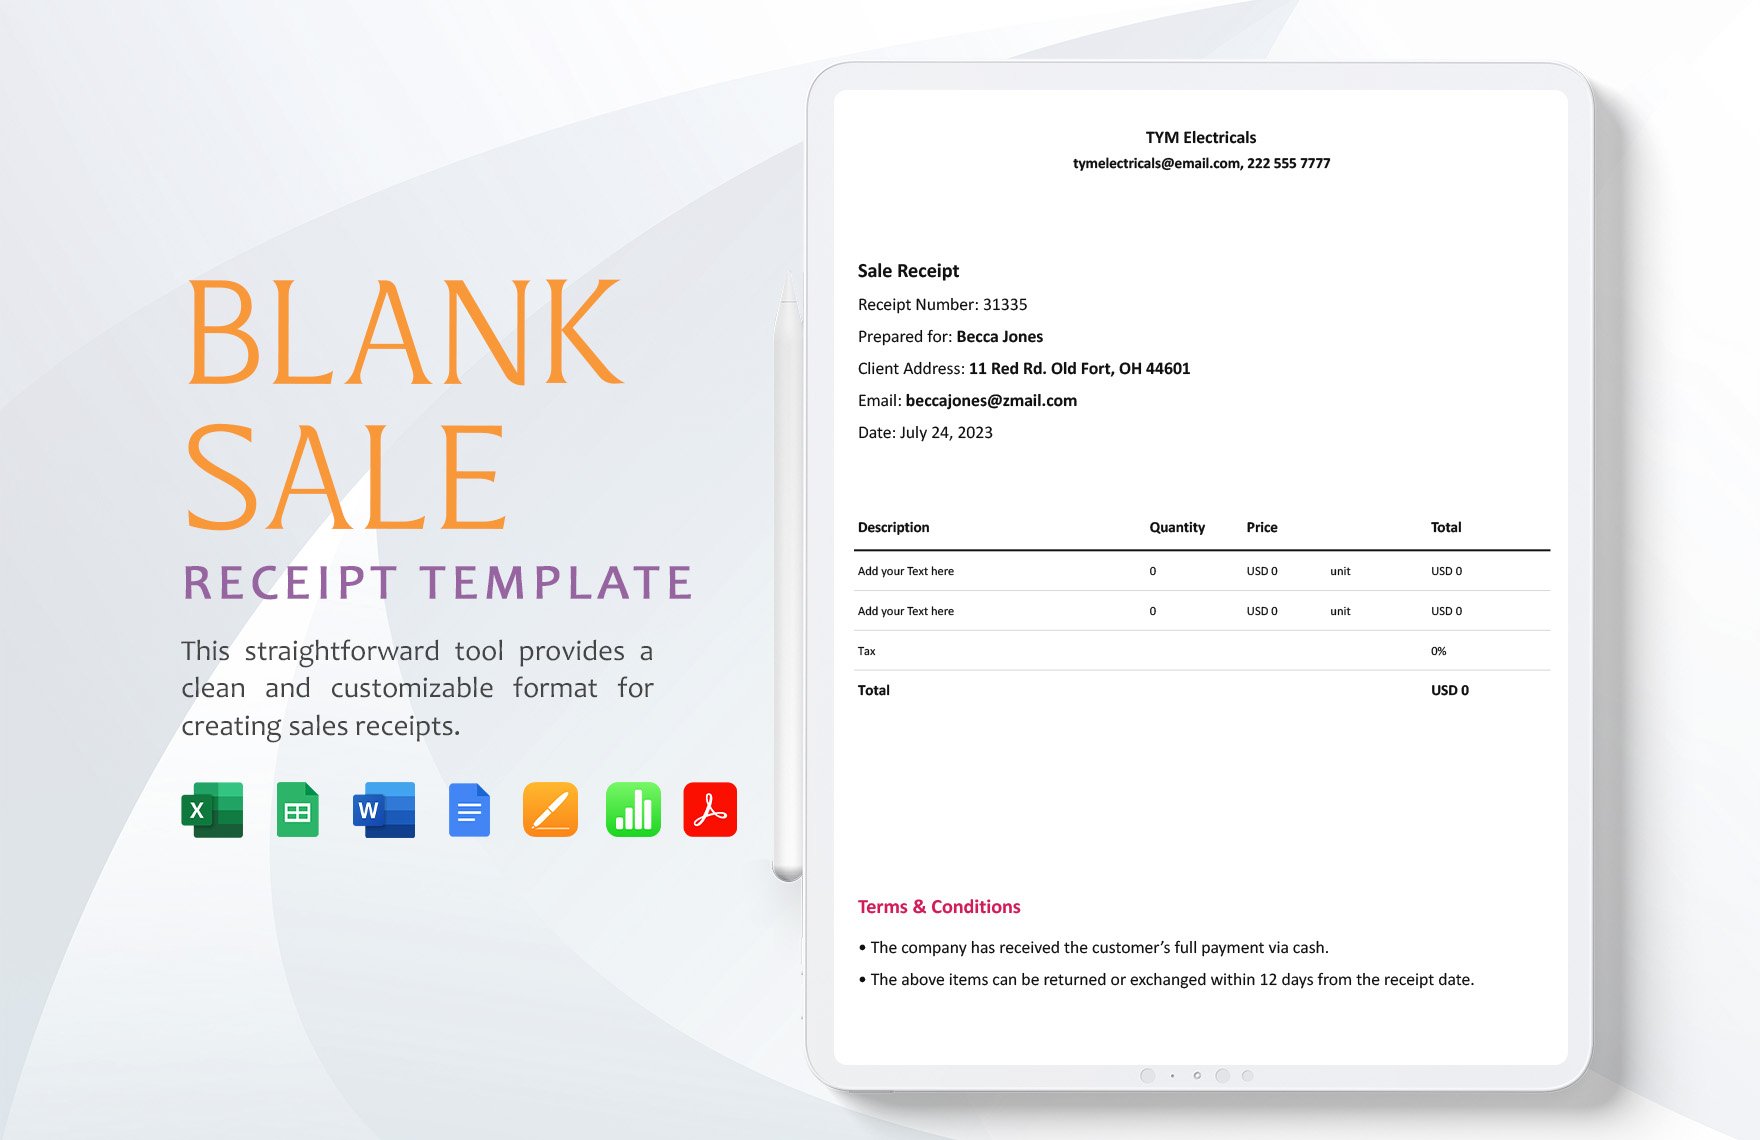 Blank Sale Receipt Template in Word, Google Docs, Excel, PDF, Google Sheets, Apple Pages, Apple Numbers